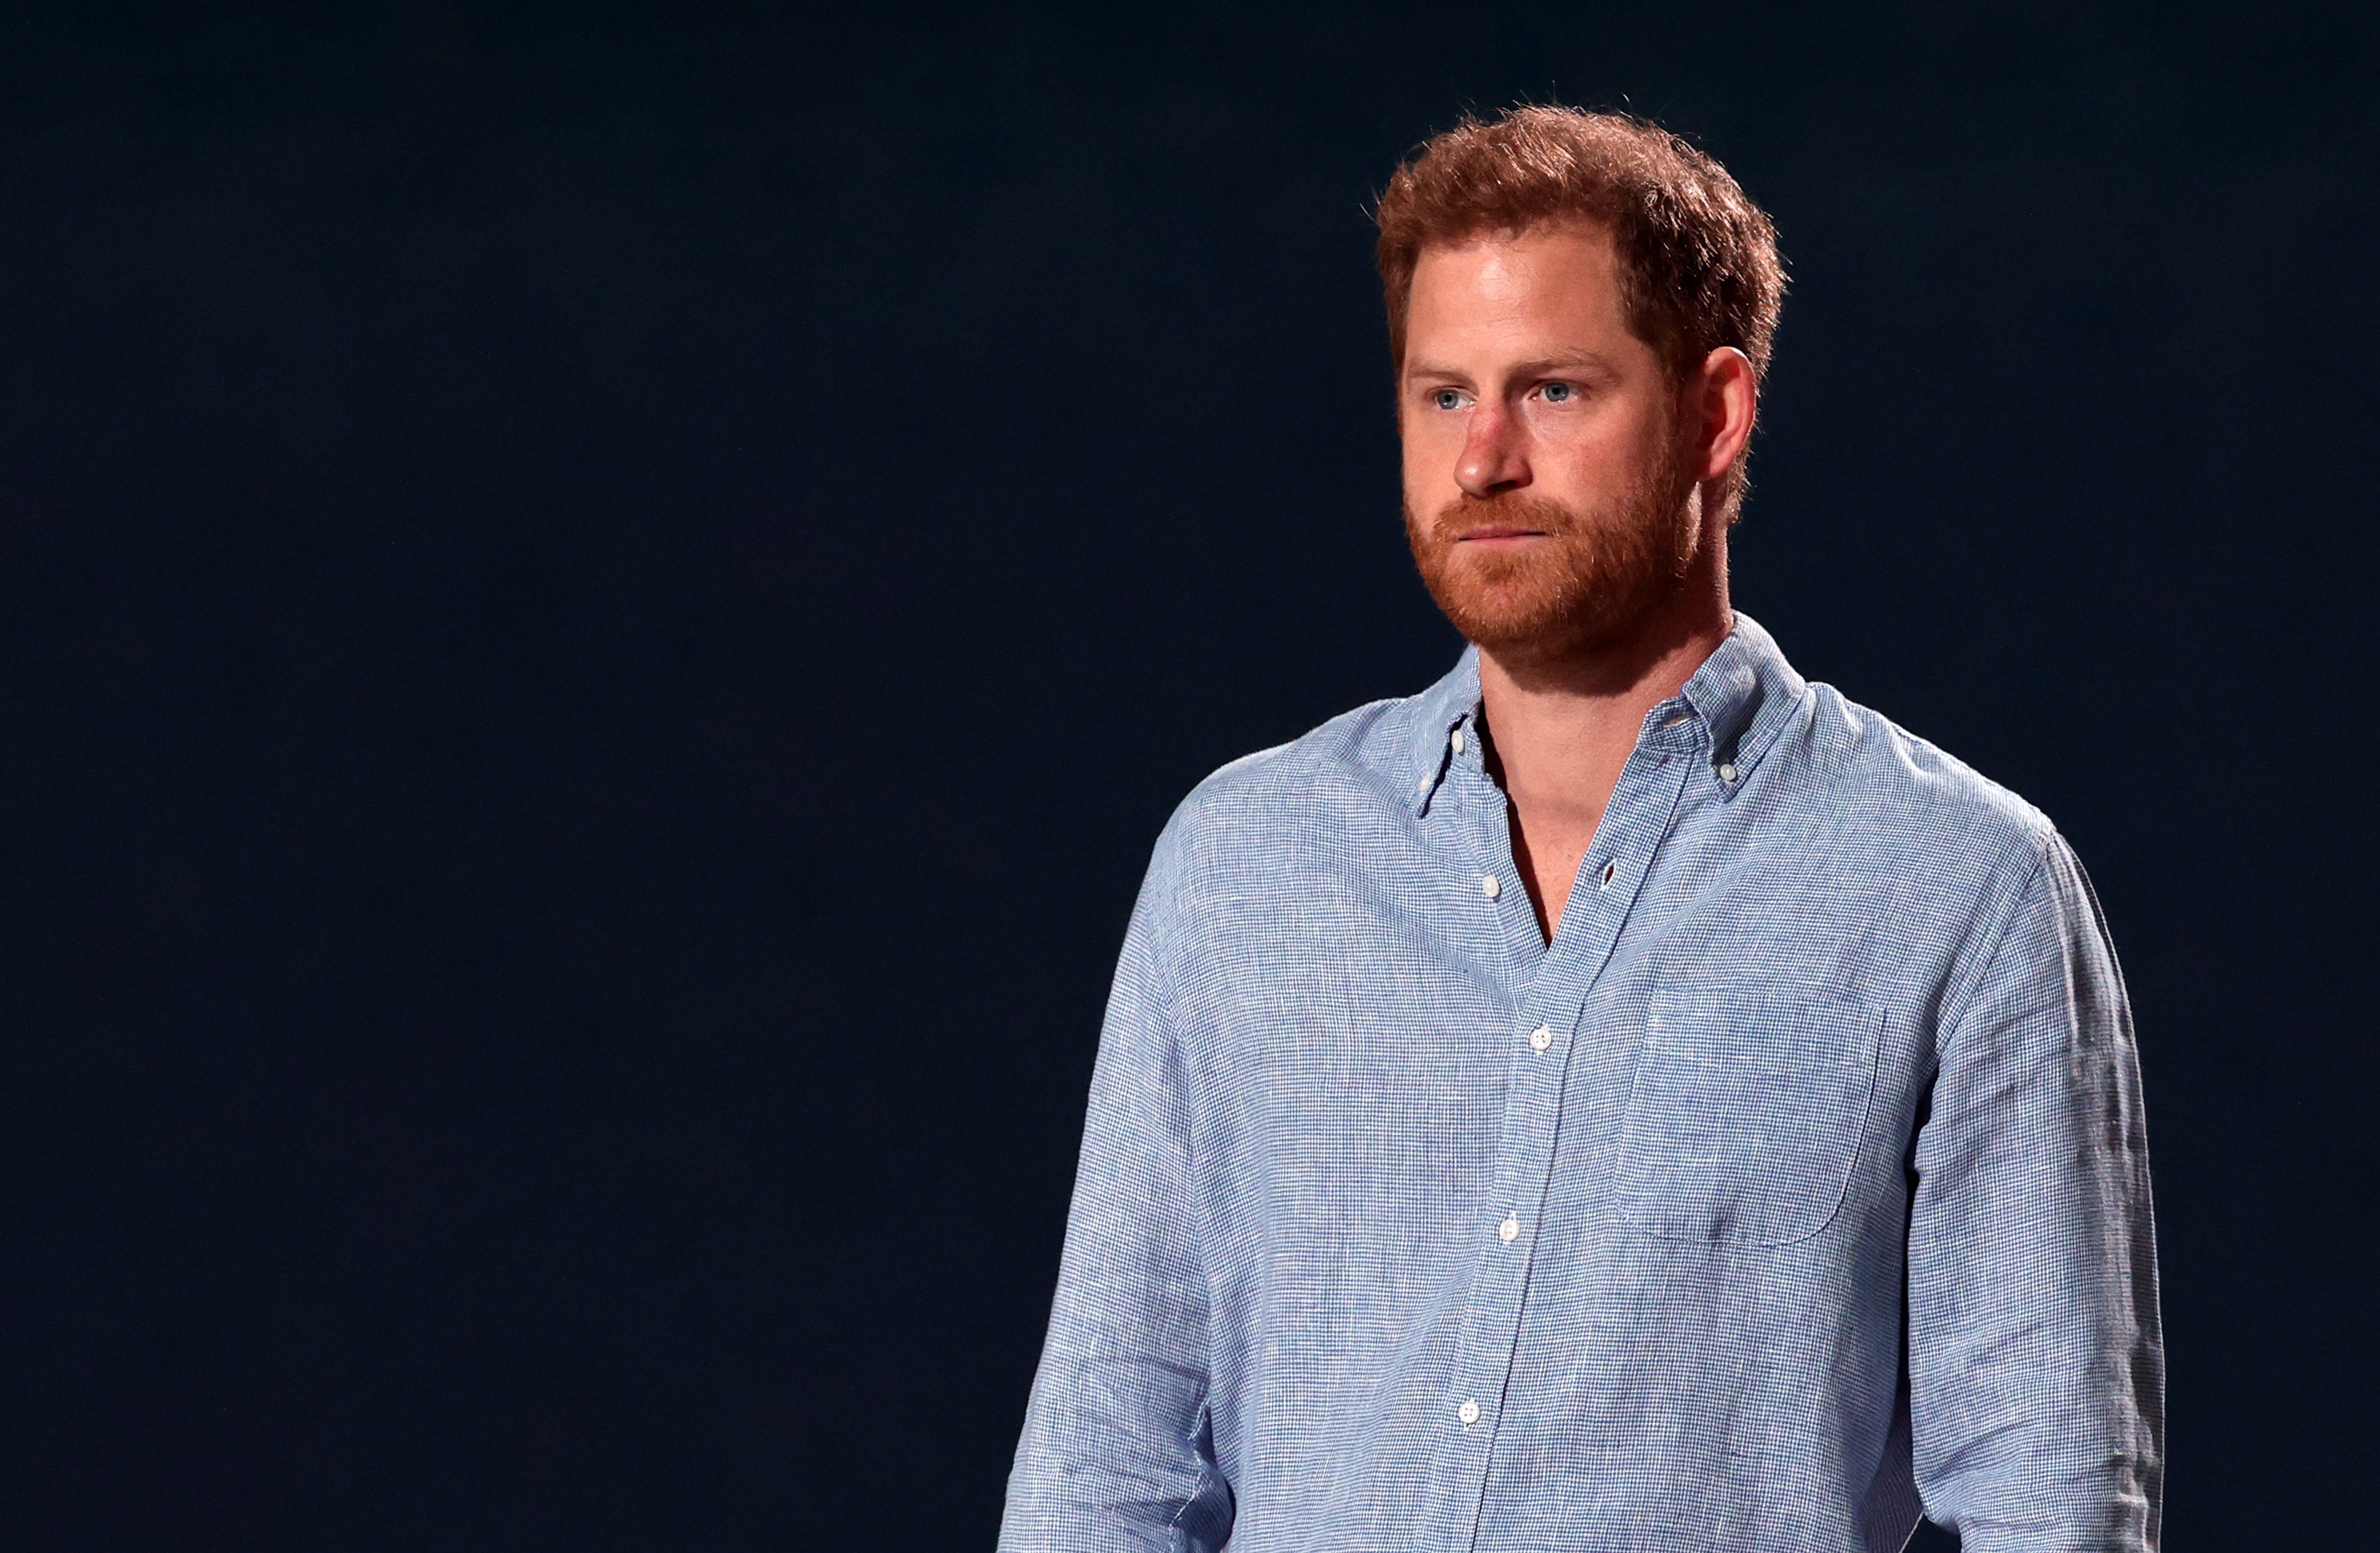 Prince Harry, The Duke of Sussex, speaks onstage during Global Citizen VAX LIVE: The Concert To Reunite The World at SoFi Stadium in Inglewood, California May 2 2021 | Source: Getty Images